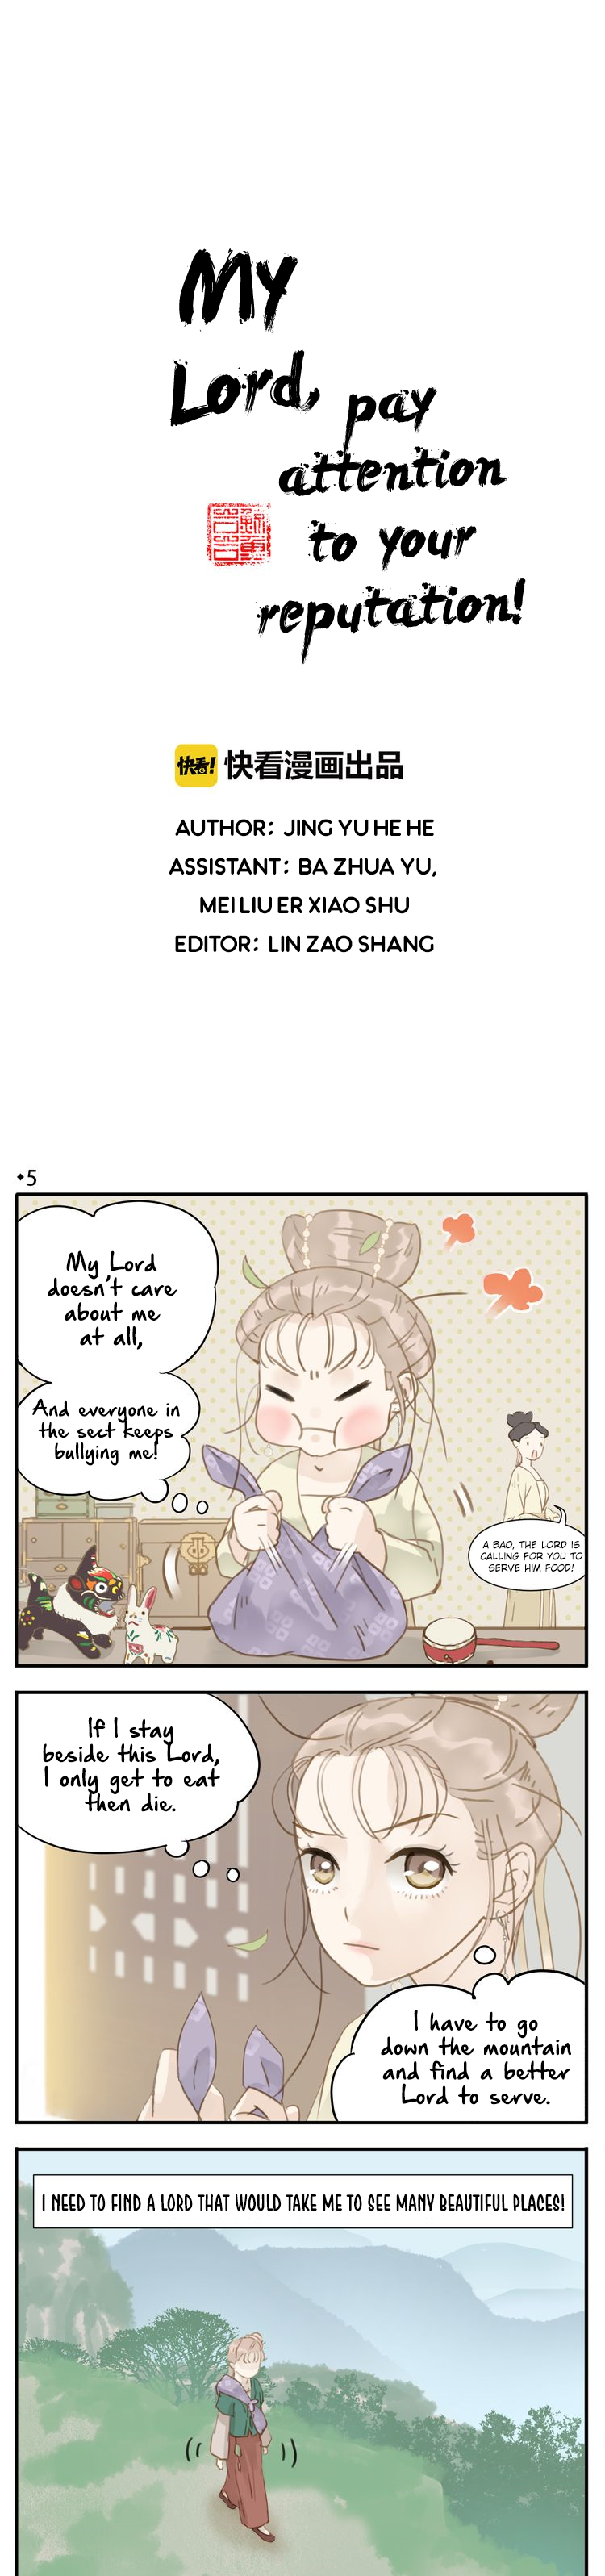 My Lord, Pay Attention To Your Reputation! - Page 1